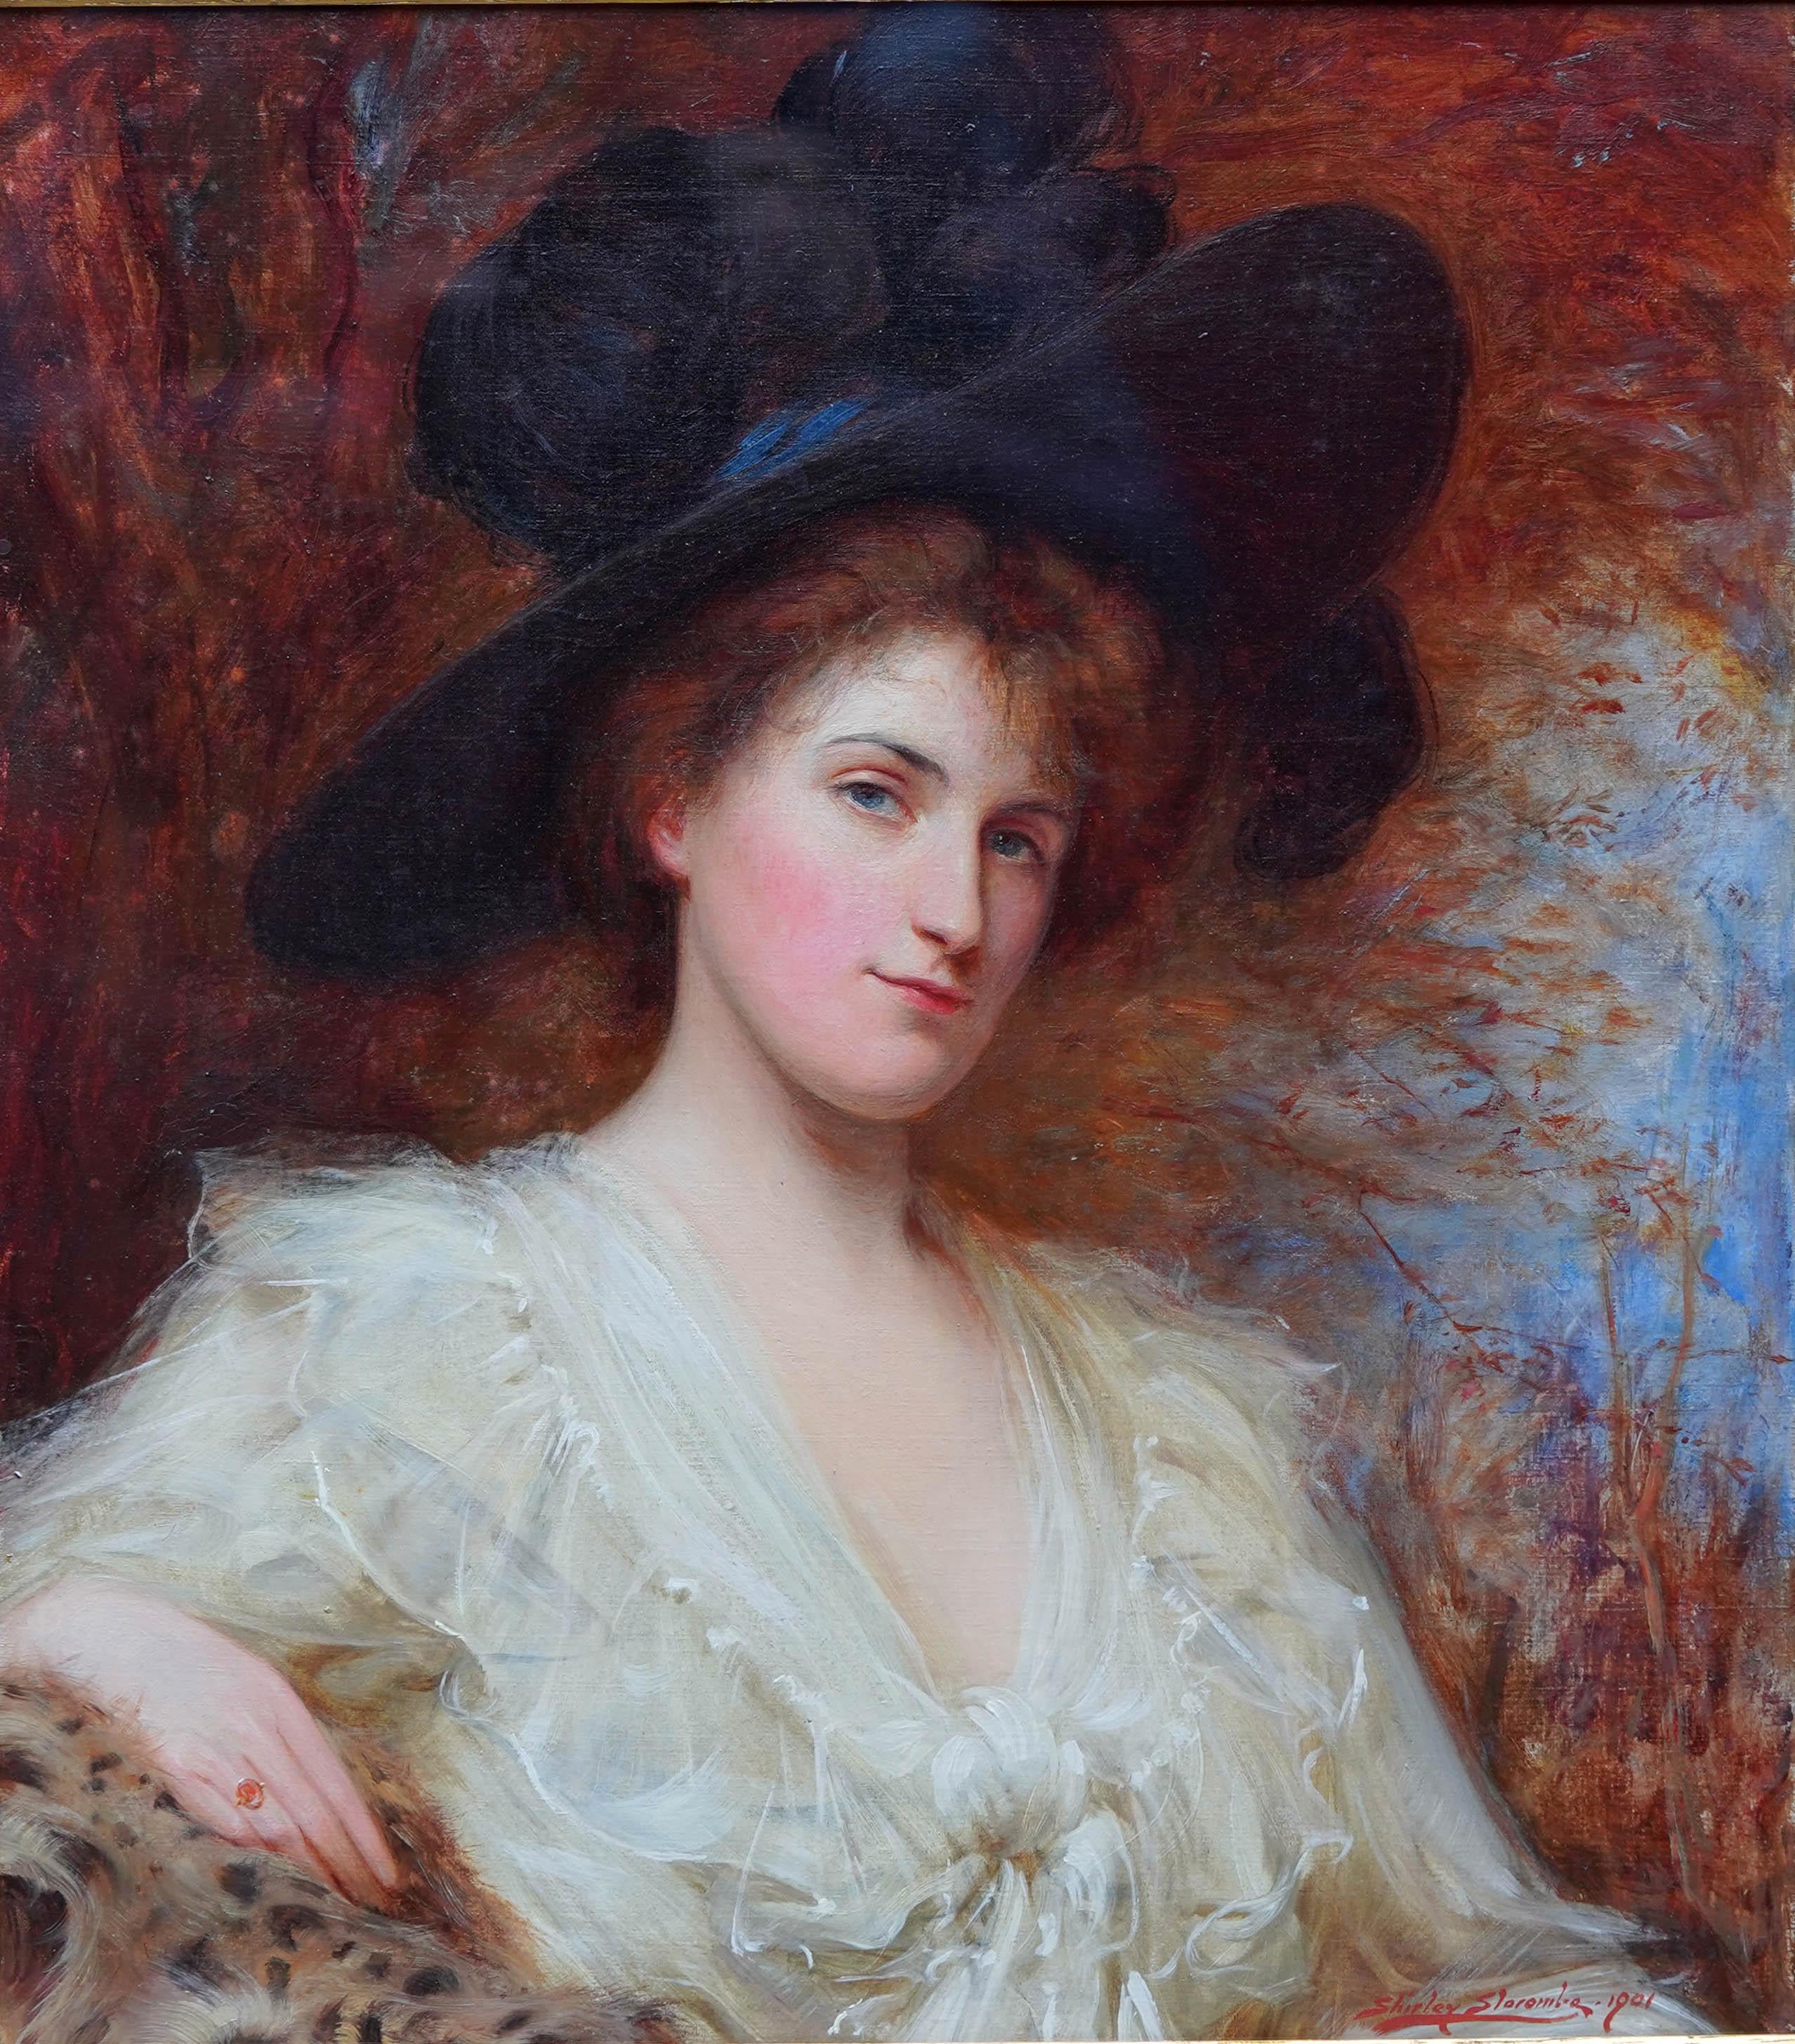 Portrait of a Lady in Black Hat - British Edwardian art oil painting - Painting by Shirley Charles Slocombe